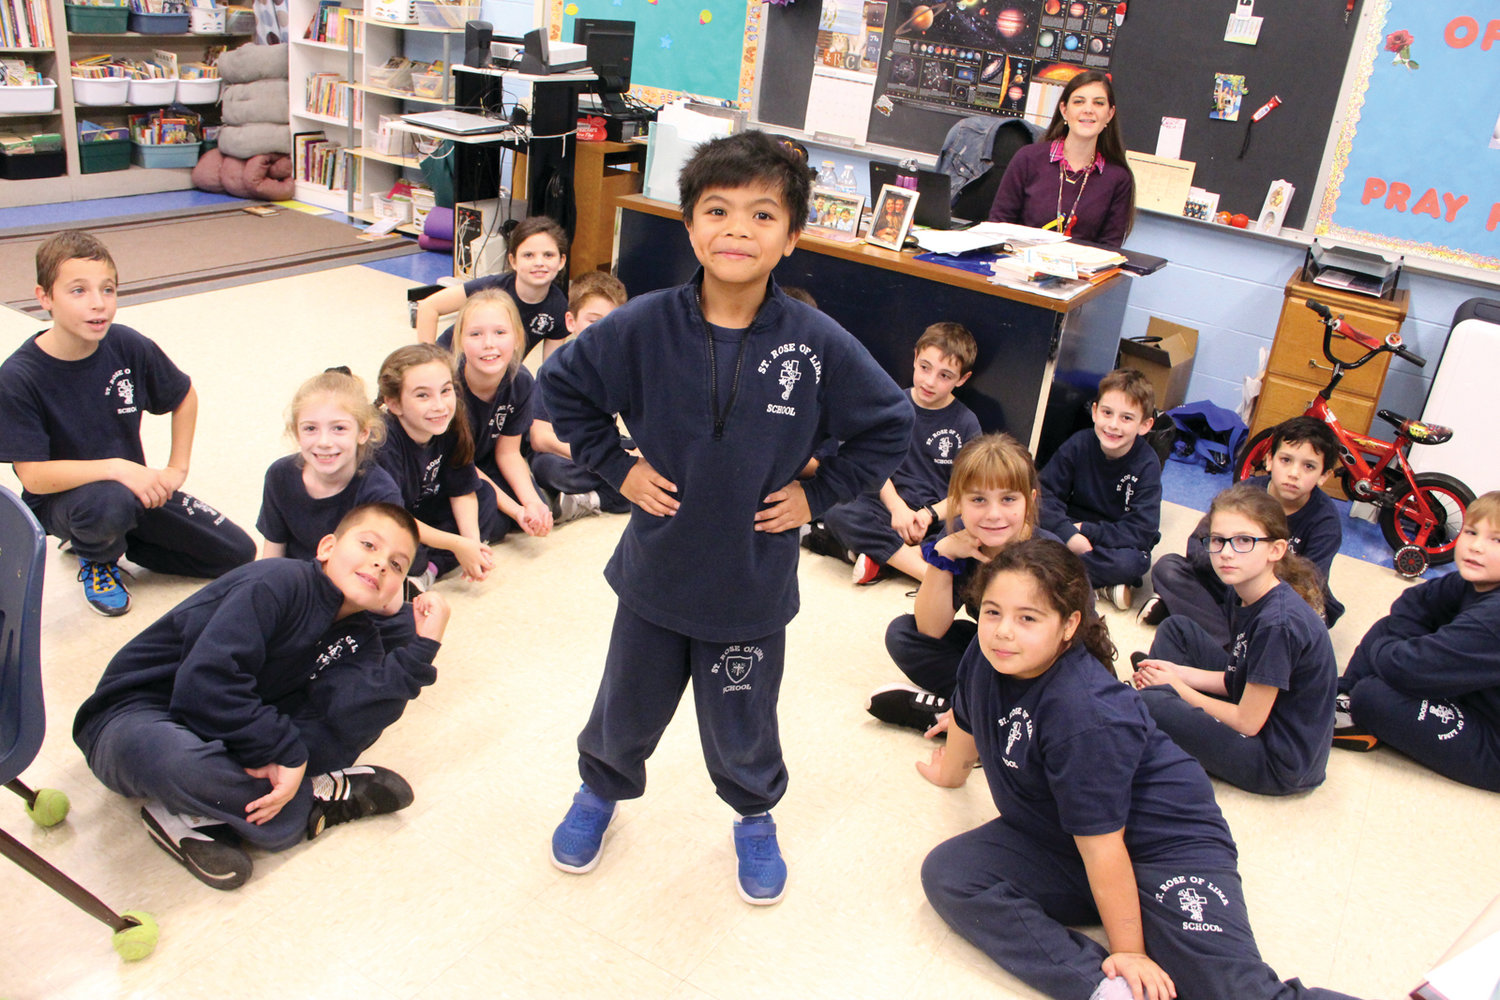 BIG ROLE FOR A 3rd GRADER: Honesto Aguinaldo takes center stage in front of his classmates at St. Rose of Lima School. He is playing the role of Tiny Tim in Trinity Rep’s production of A Christmas Carol.